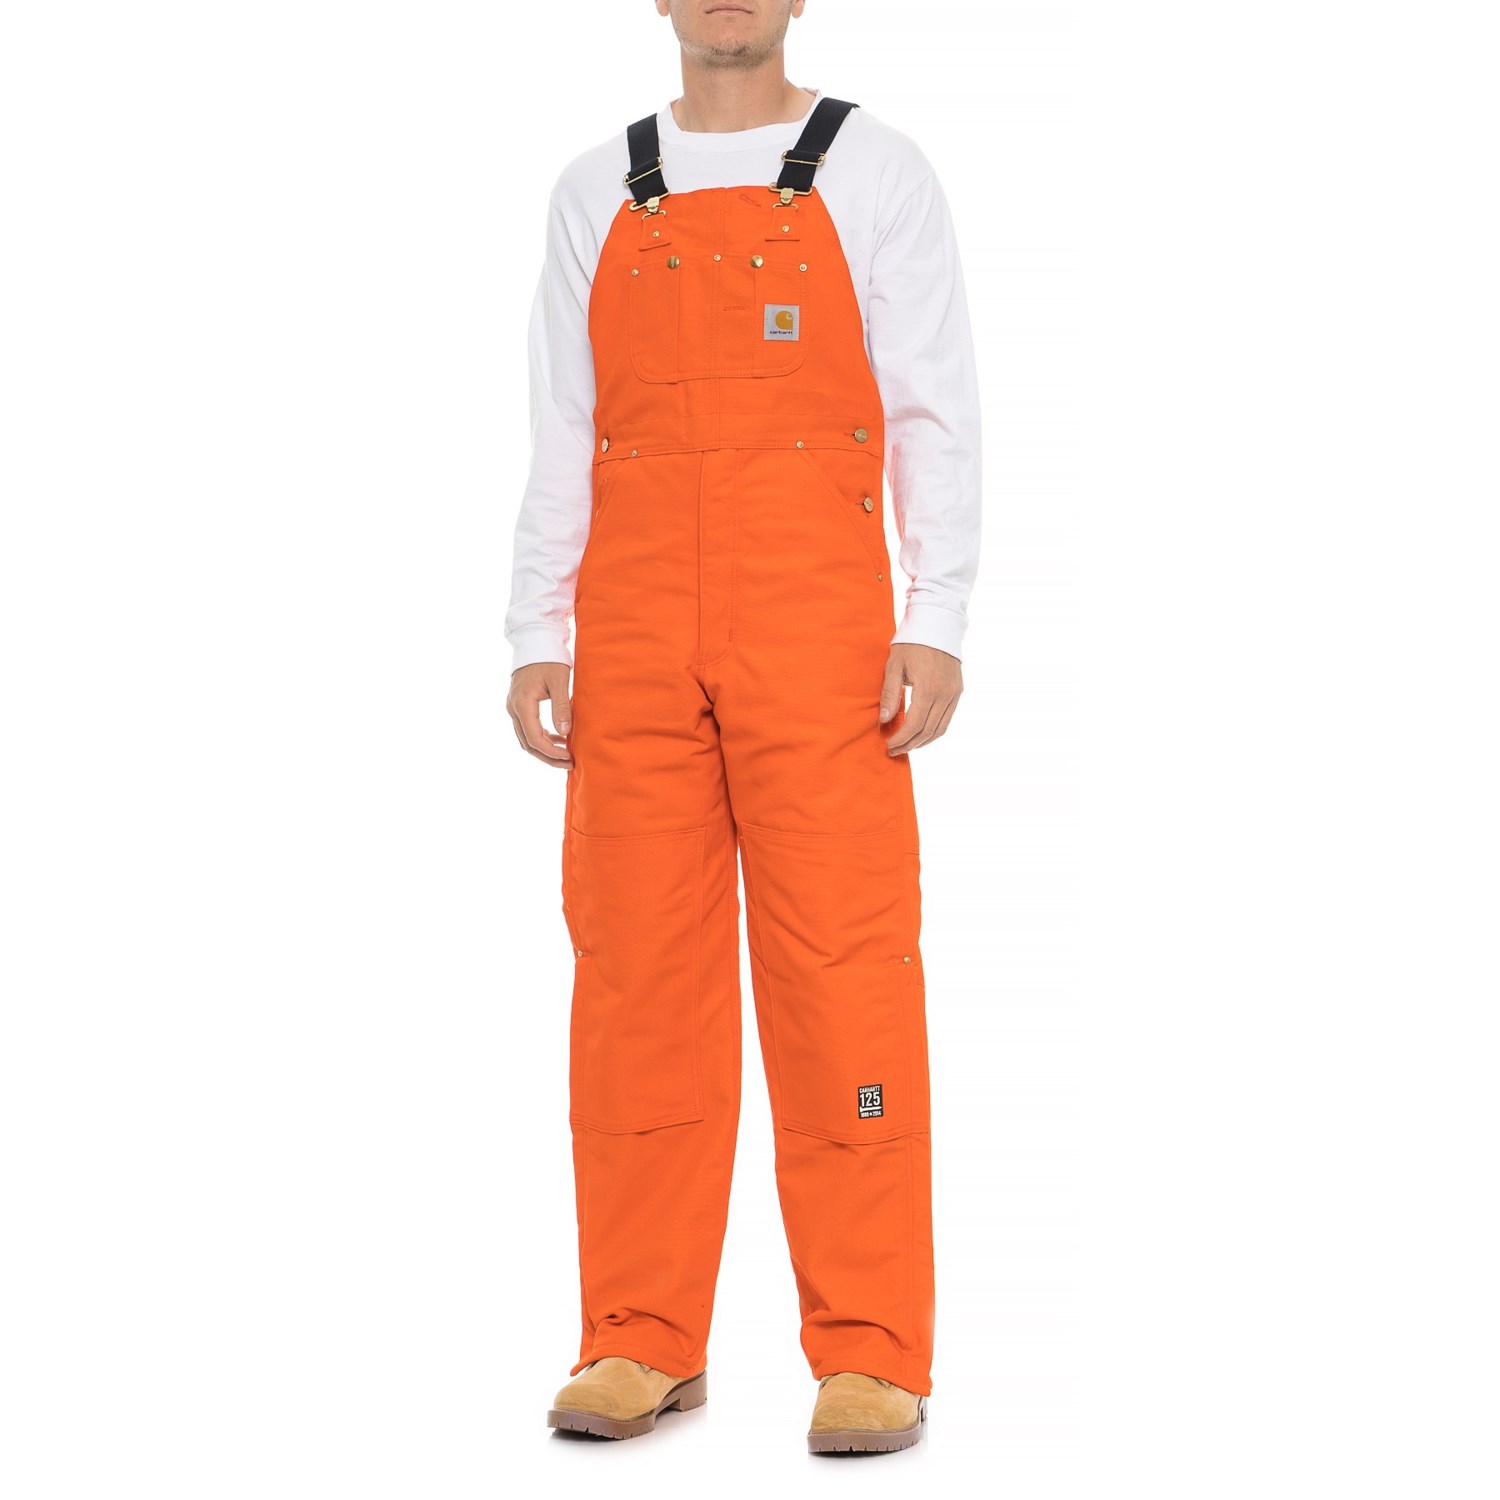 Carhartt Insulated Coverall Size Chart